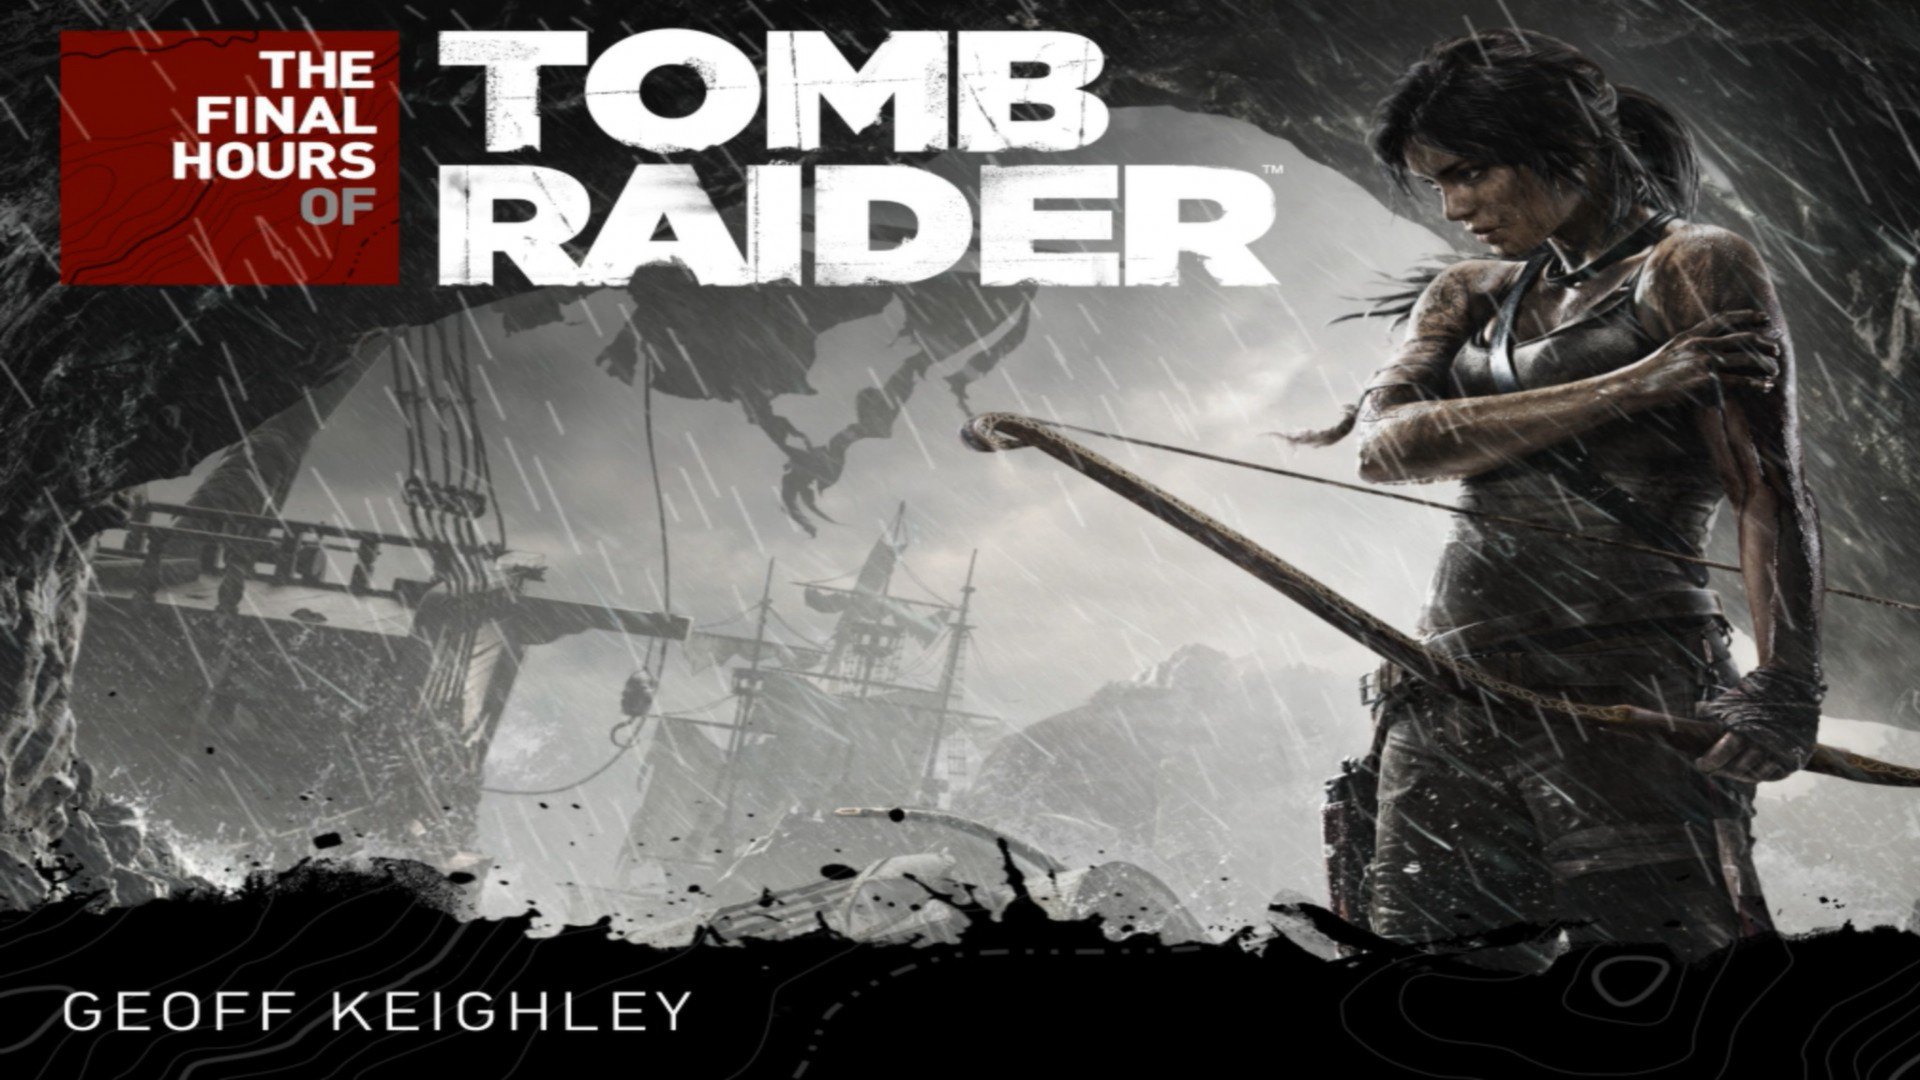 Tomb Raider - The Final Hours Digital Book Steam Gift